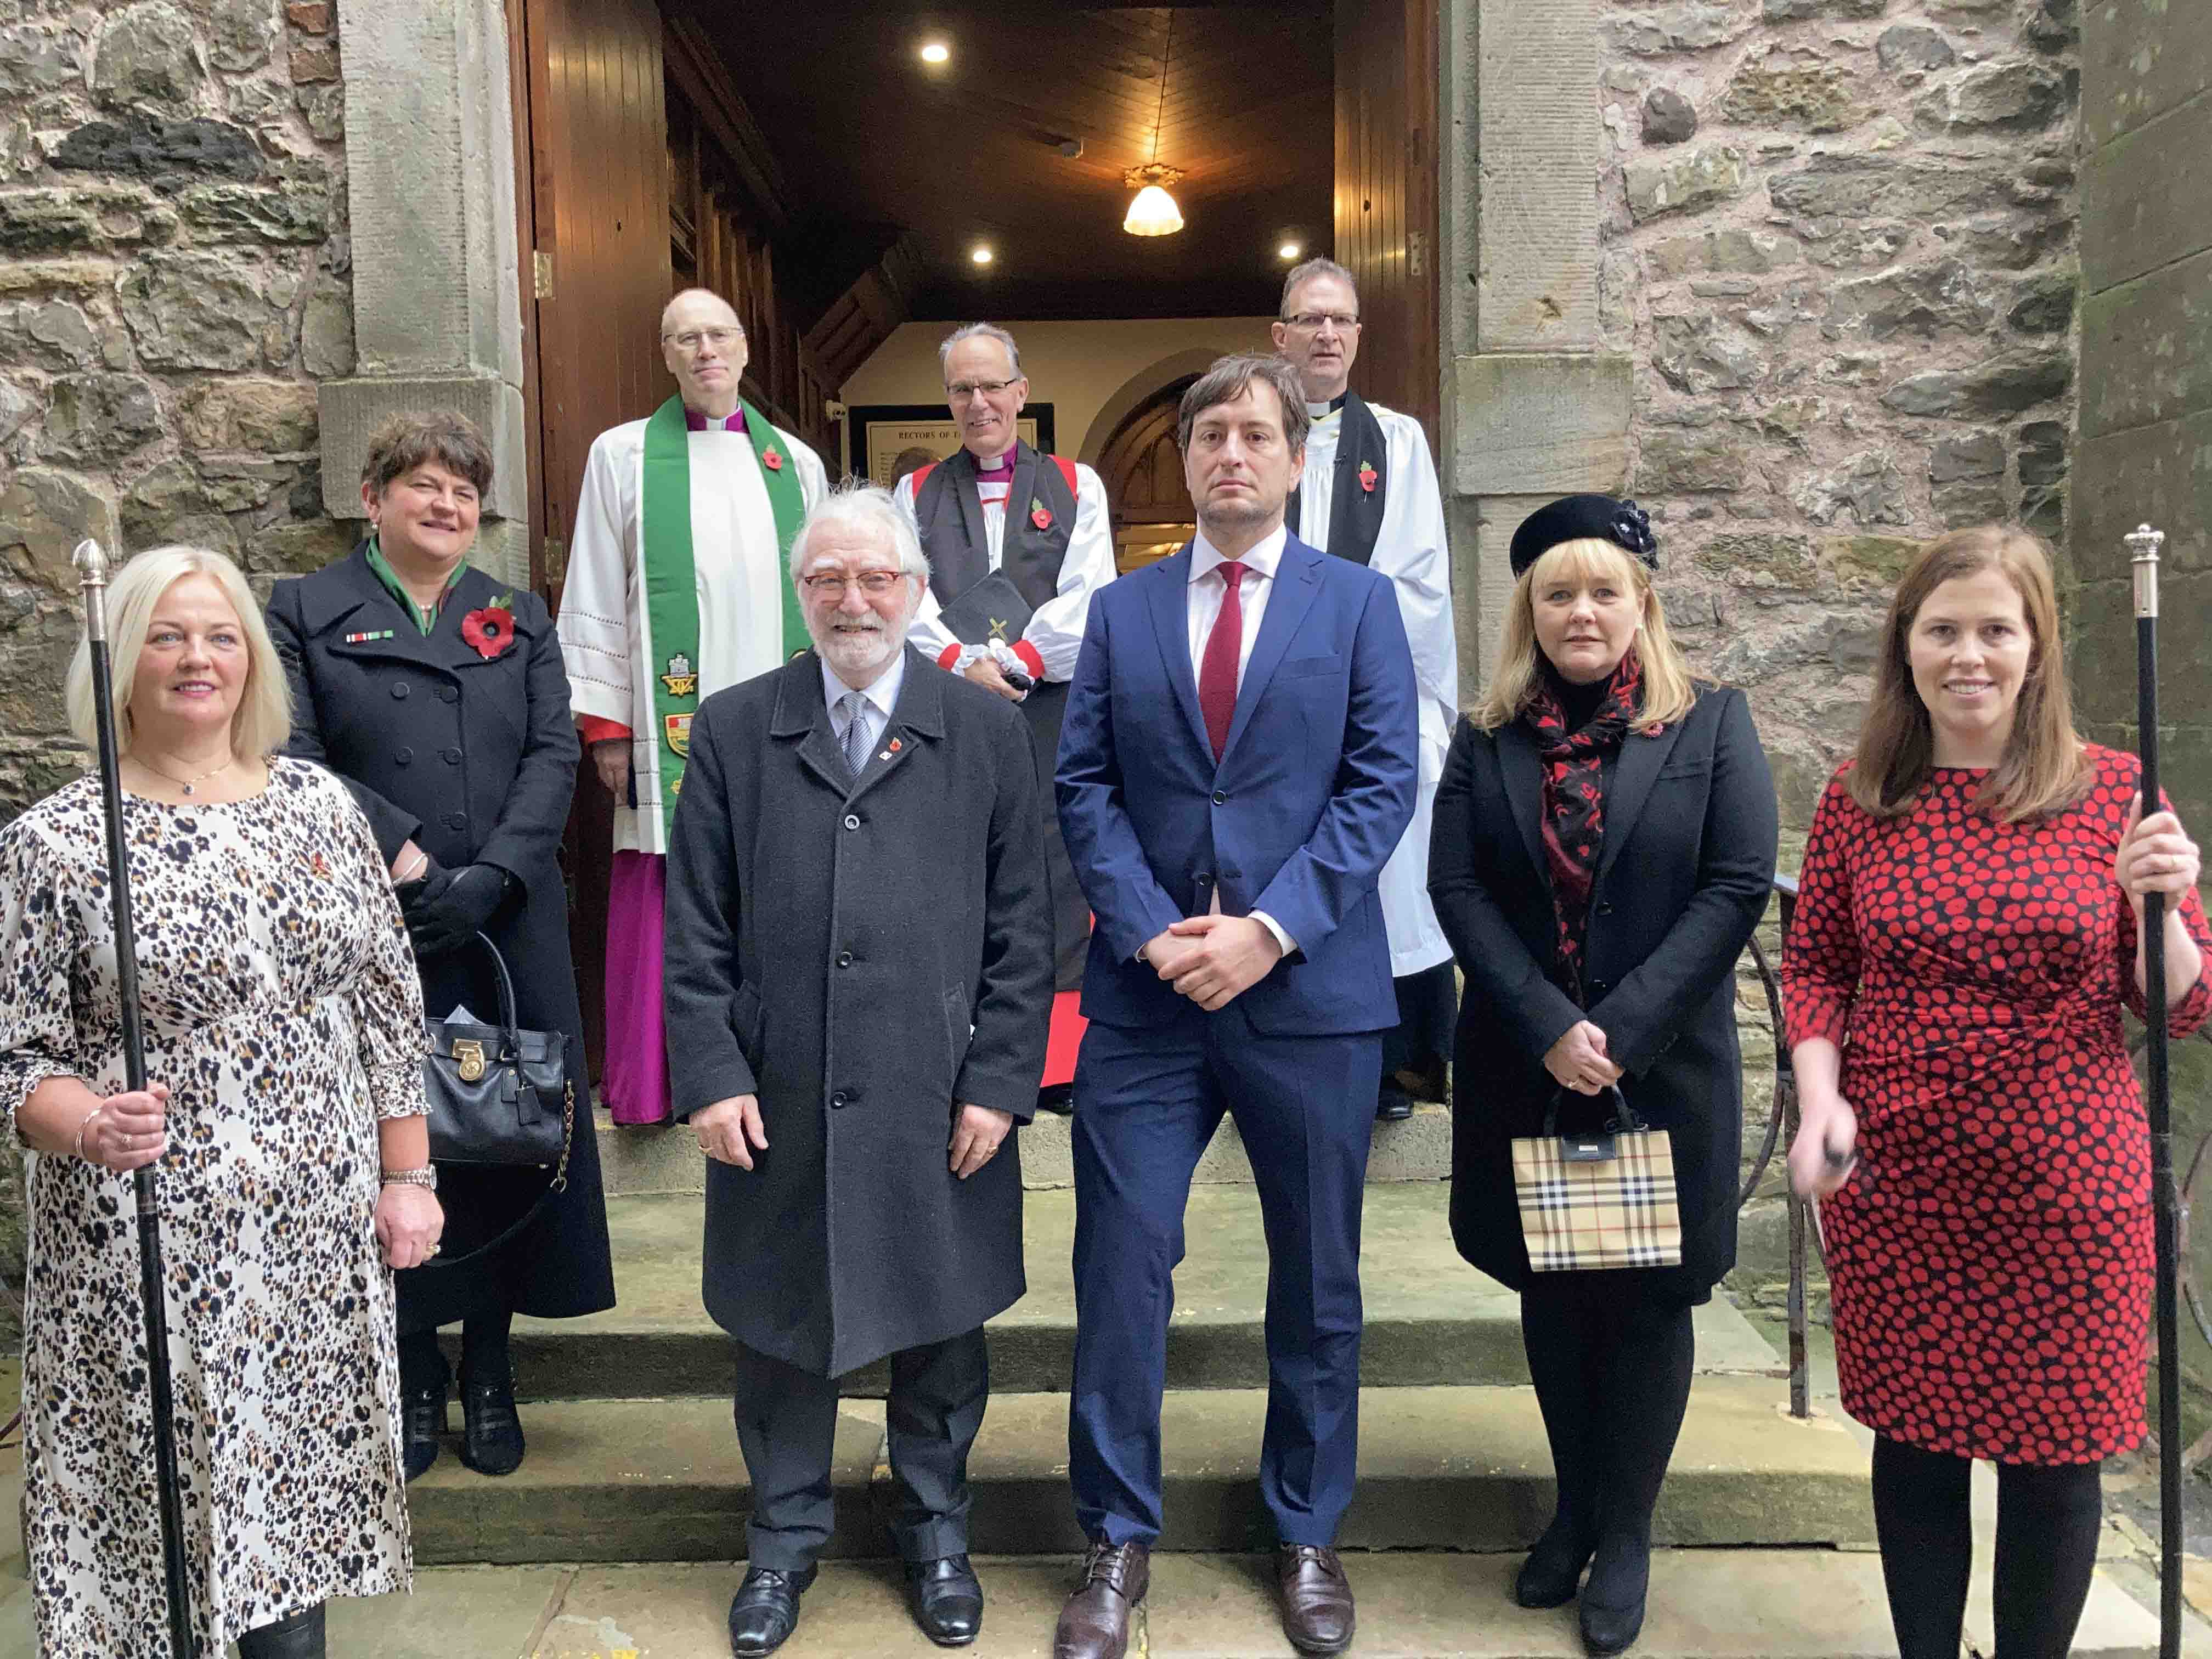 Front from left: Mrs Audrey Williamson, Churchwarden; Mrs Arlene Foster, former First Minister; Mr Jerome Mullen, Honorary Consul, Poland; Mr Chris Rendo, US Consulate General representative; Ms Michele McIlveen MLA, Minister of Education; and Mrs Linda Kingston. Back row from left; Monsignor Peter O'Reilly, St Michael's Roman Catholic Church; Bishop Ian Ellis and Dean Kenneth Hall.